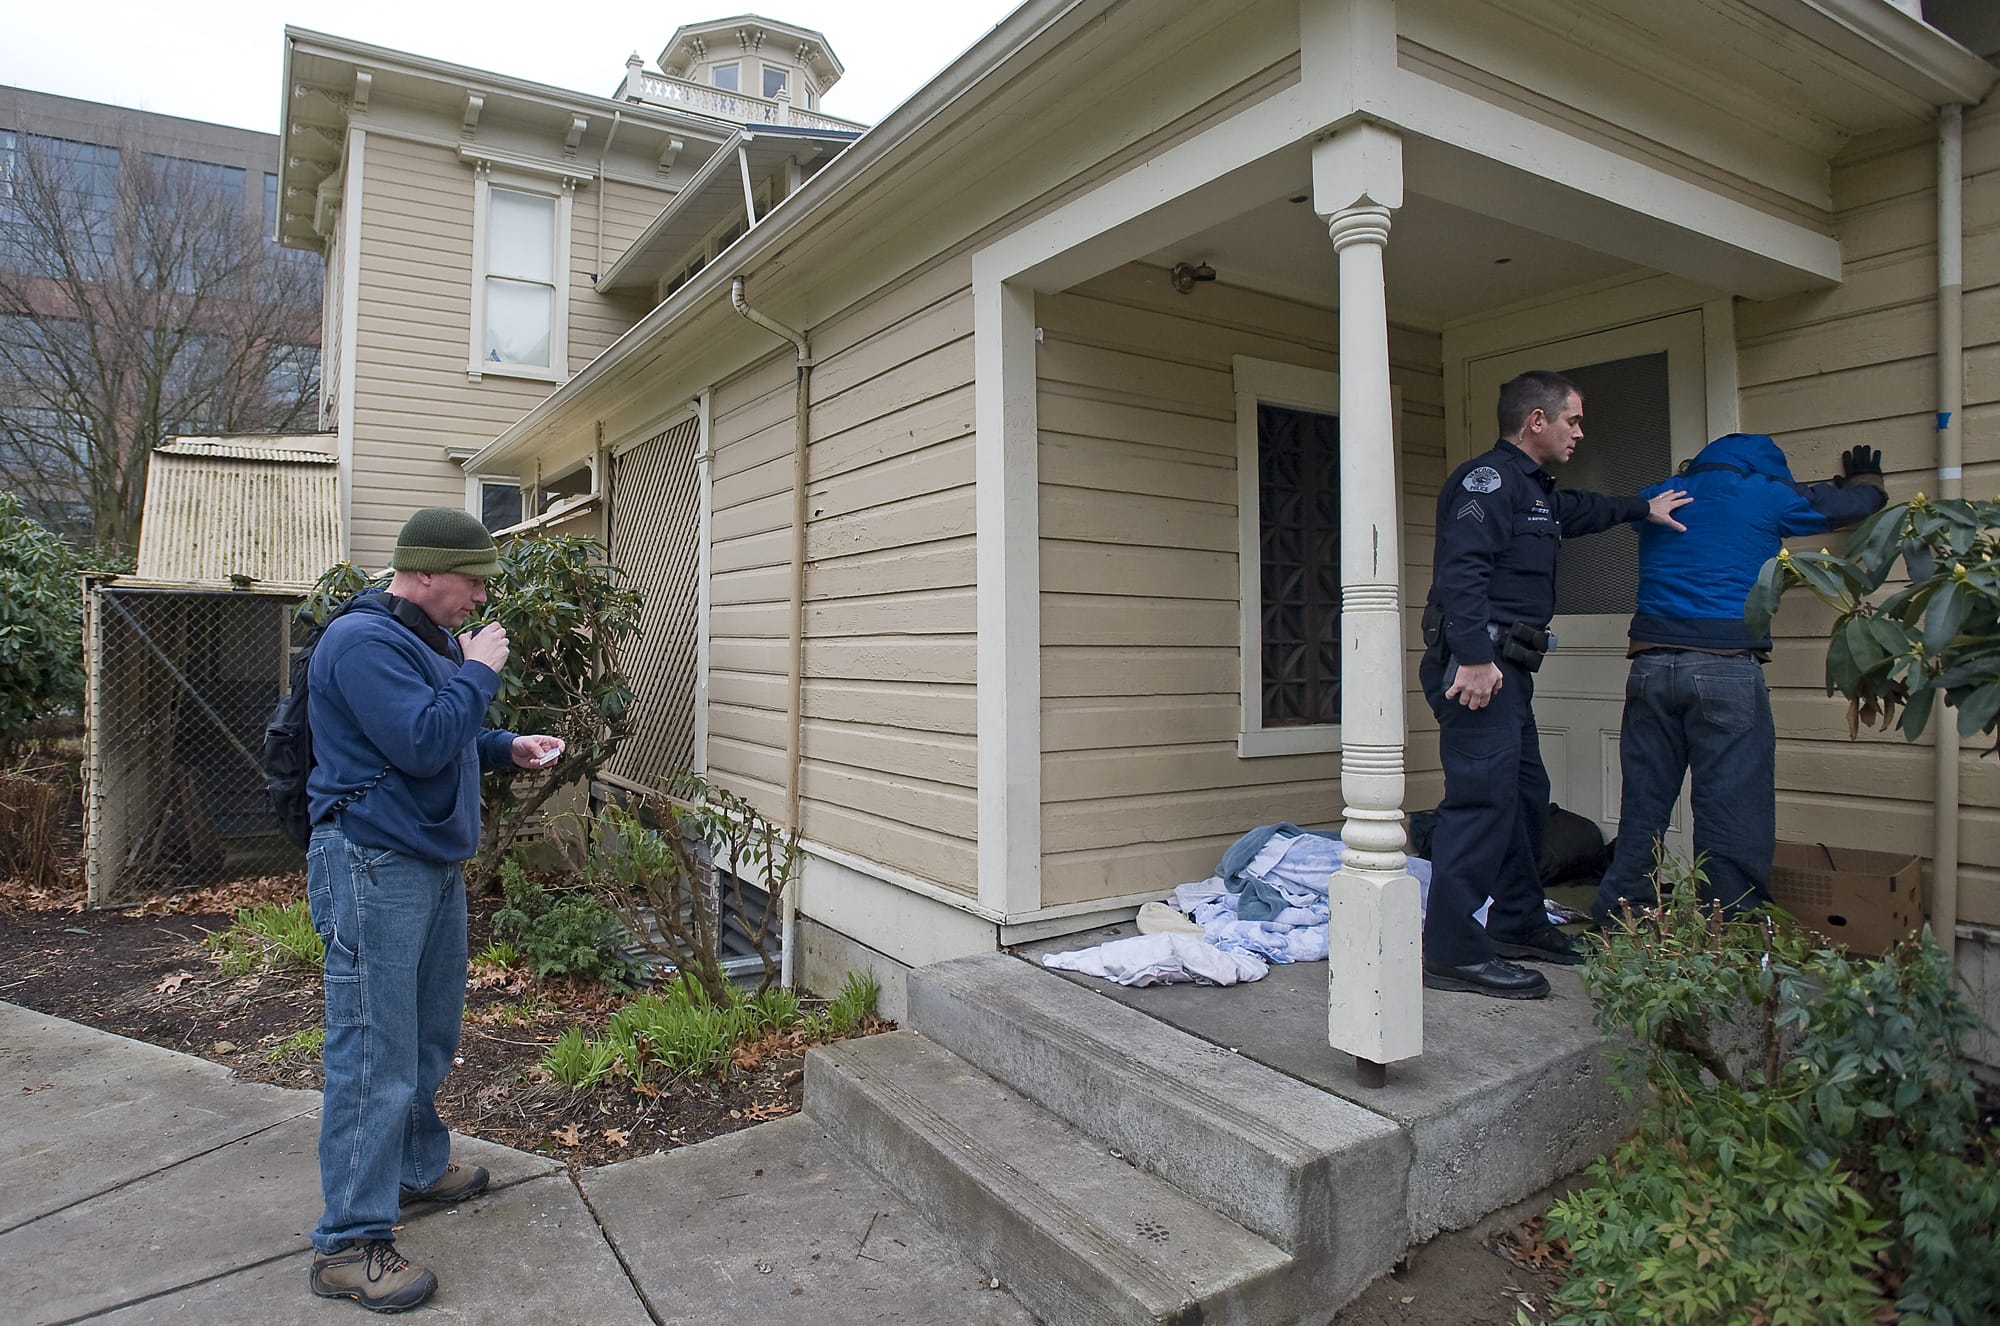 Vancouver Police Cpl. Drue Russell, left, runs a man's identification that he found camping next to the Slocum House in Esther Short Park while VPD Cpl. Duane Boynton secures the man after he disclosed to officers that he was carrying a knife, as part of an ongoing effort by authorities to make the park a safer place on Friday March 4, 2011.